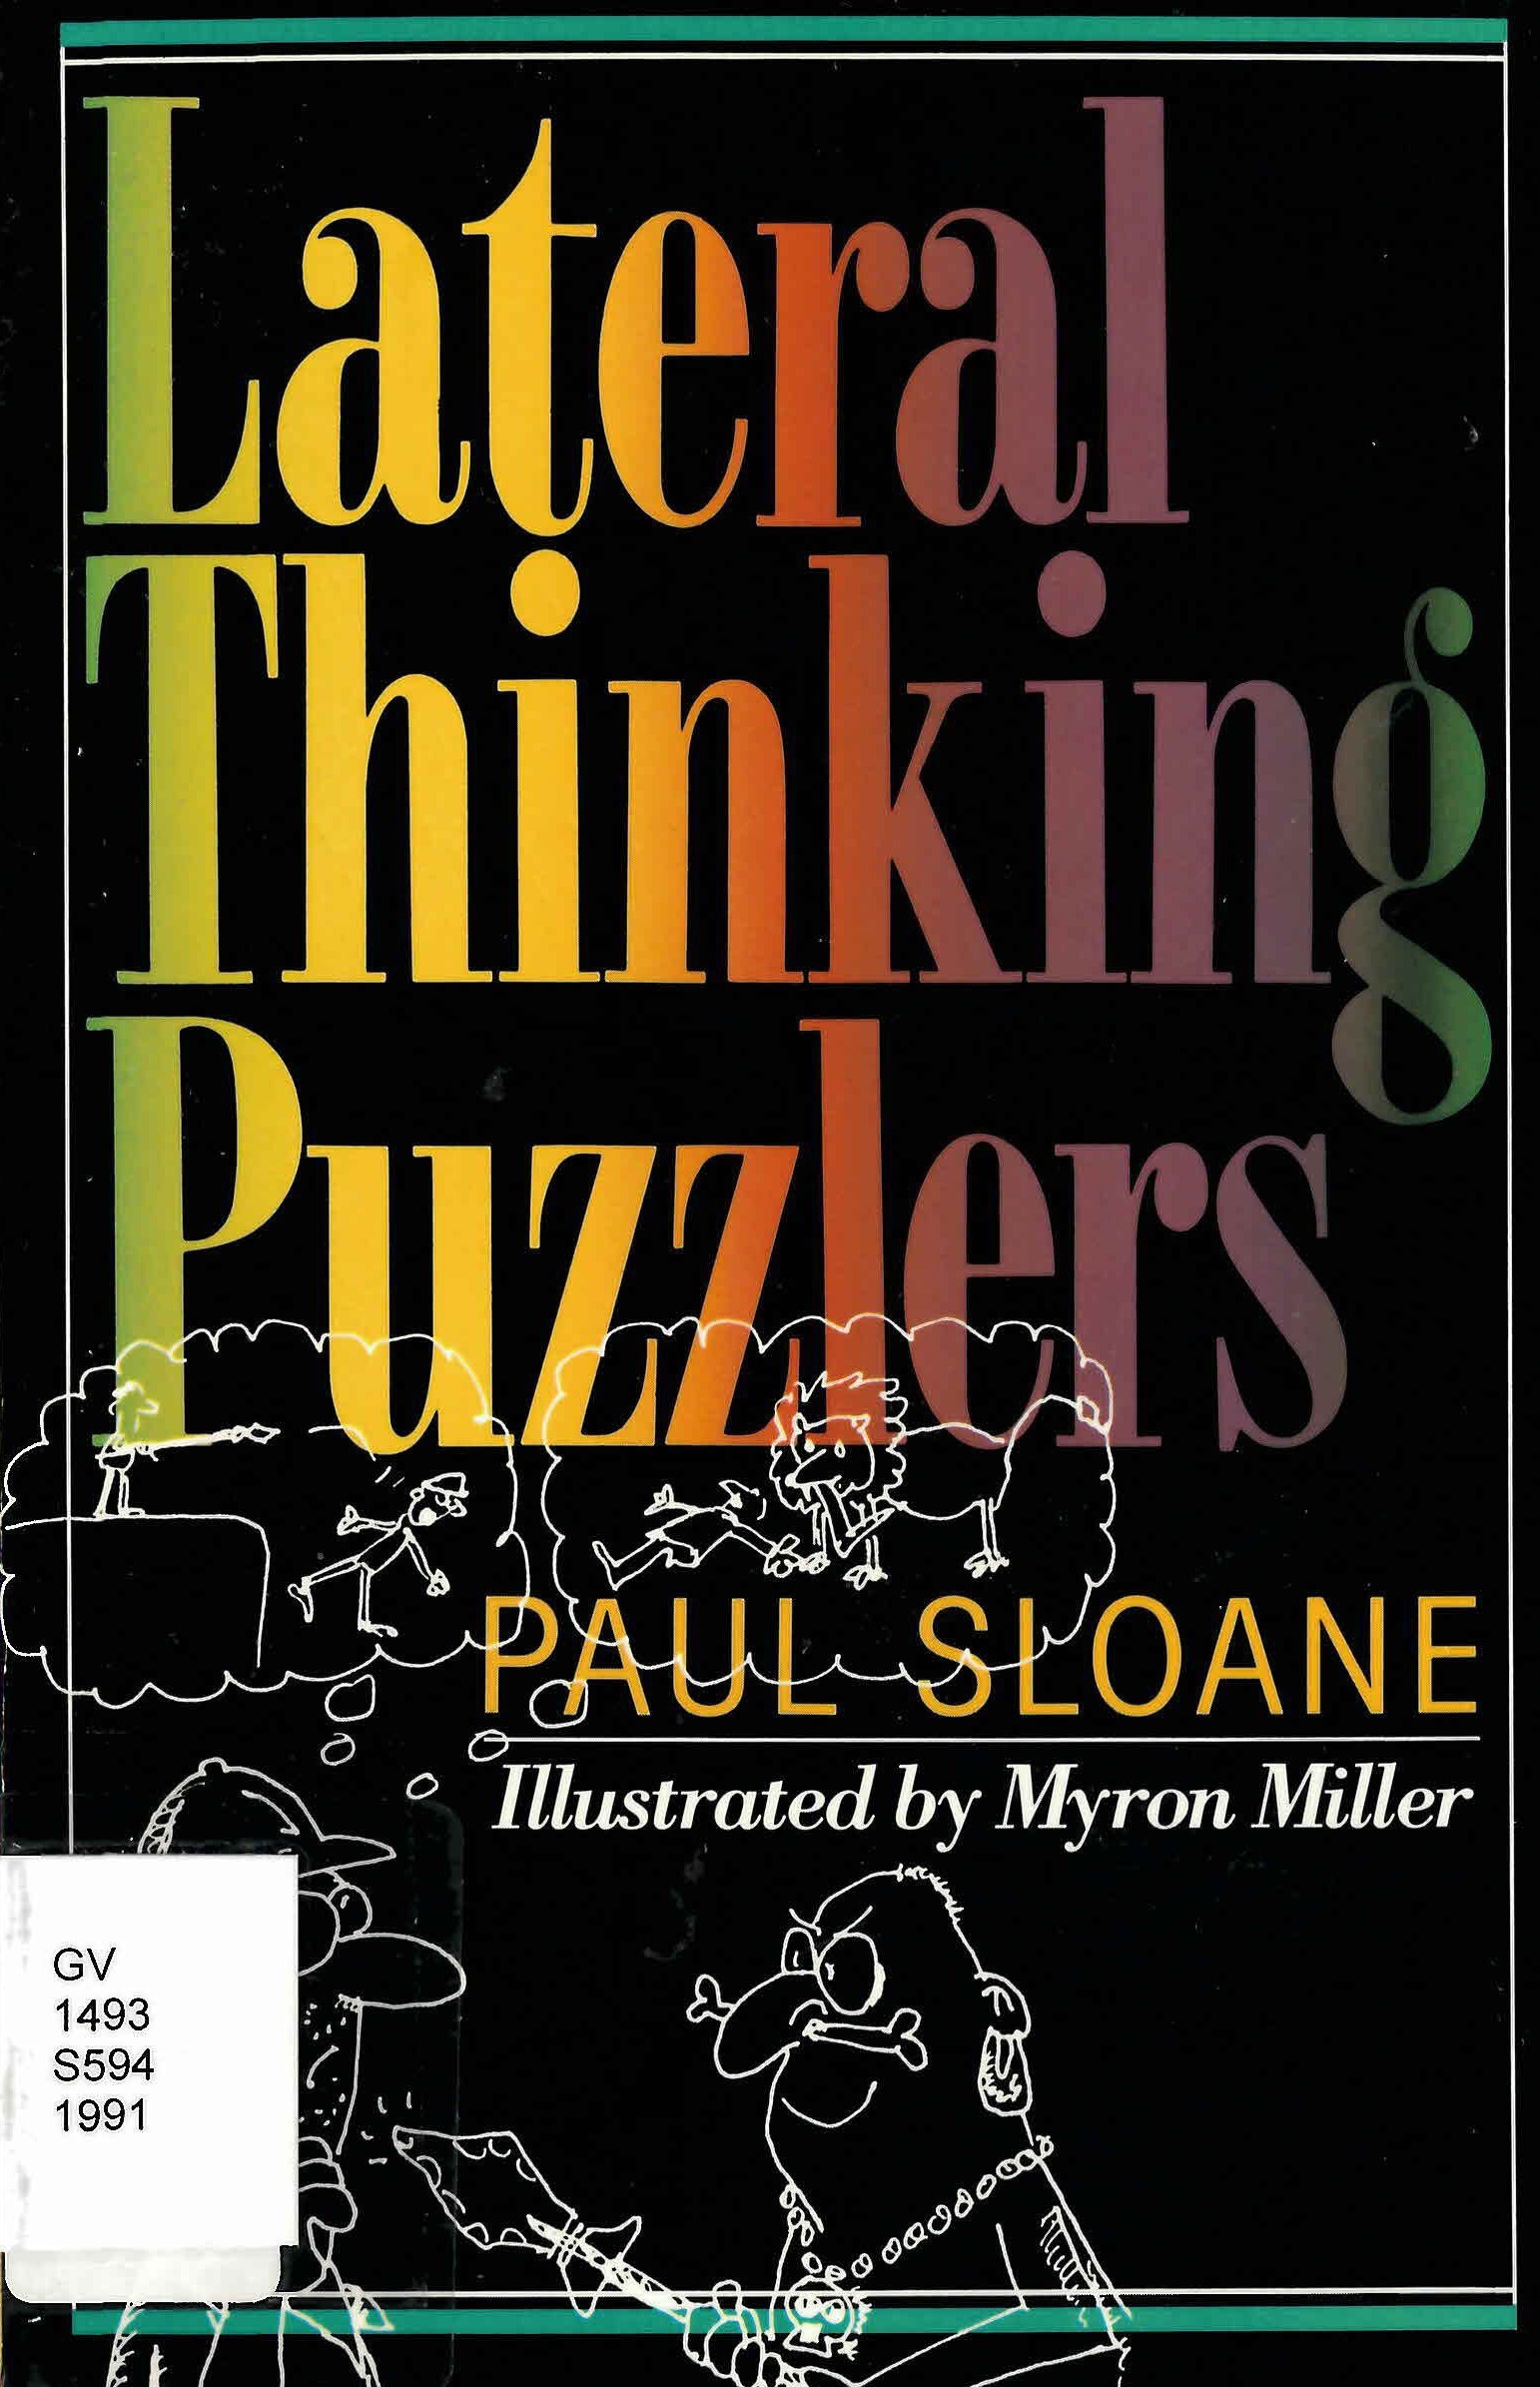 Lateral thinking puzzlers